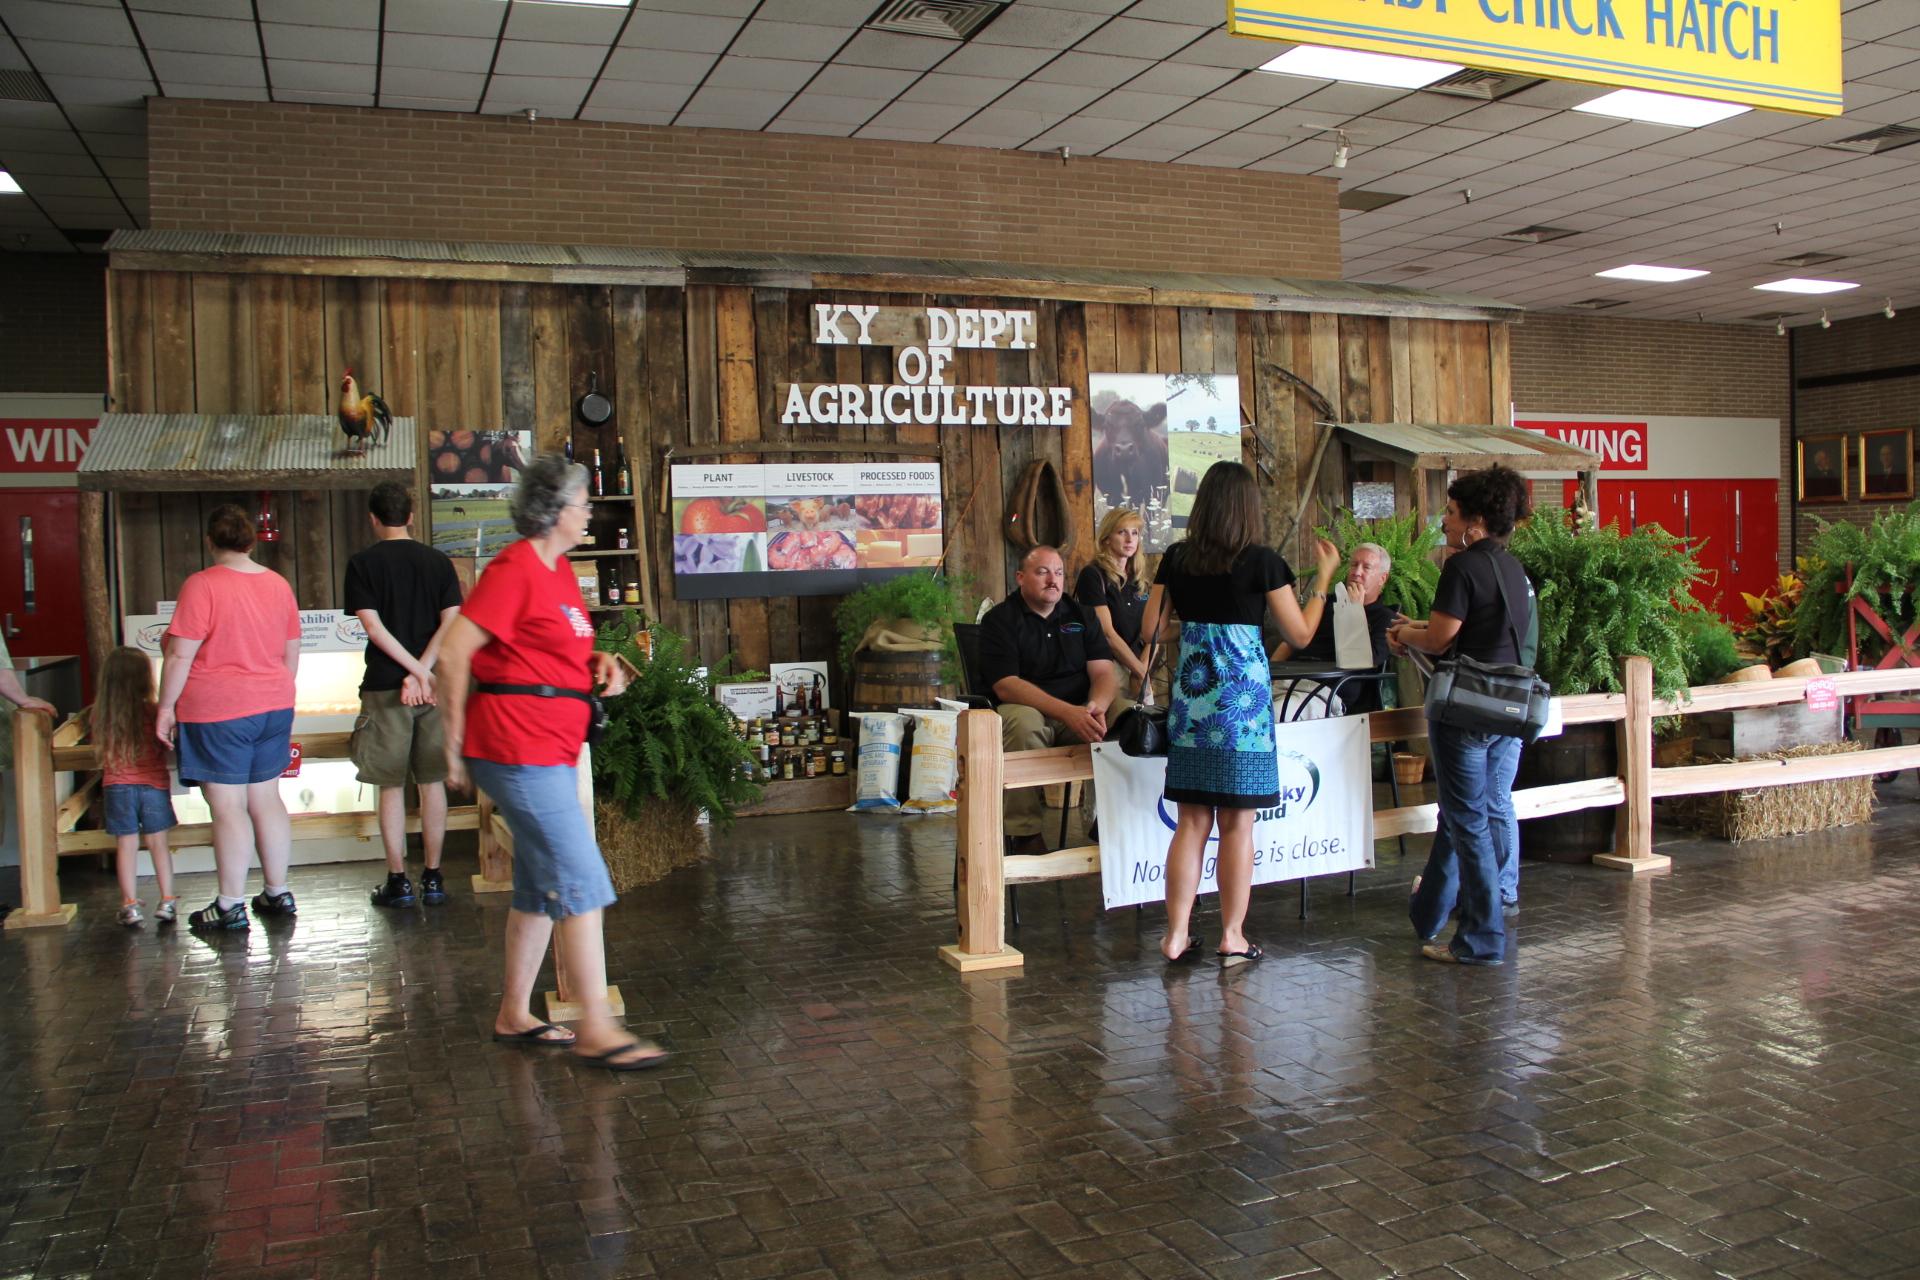 Kentucky Department of Agriculture will present new displays at the